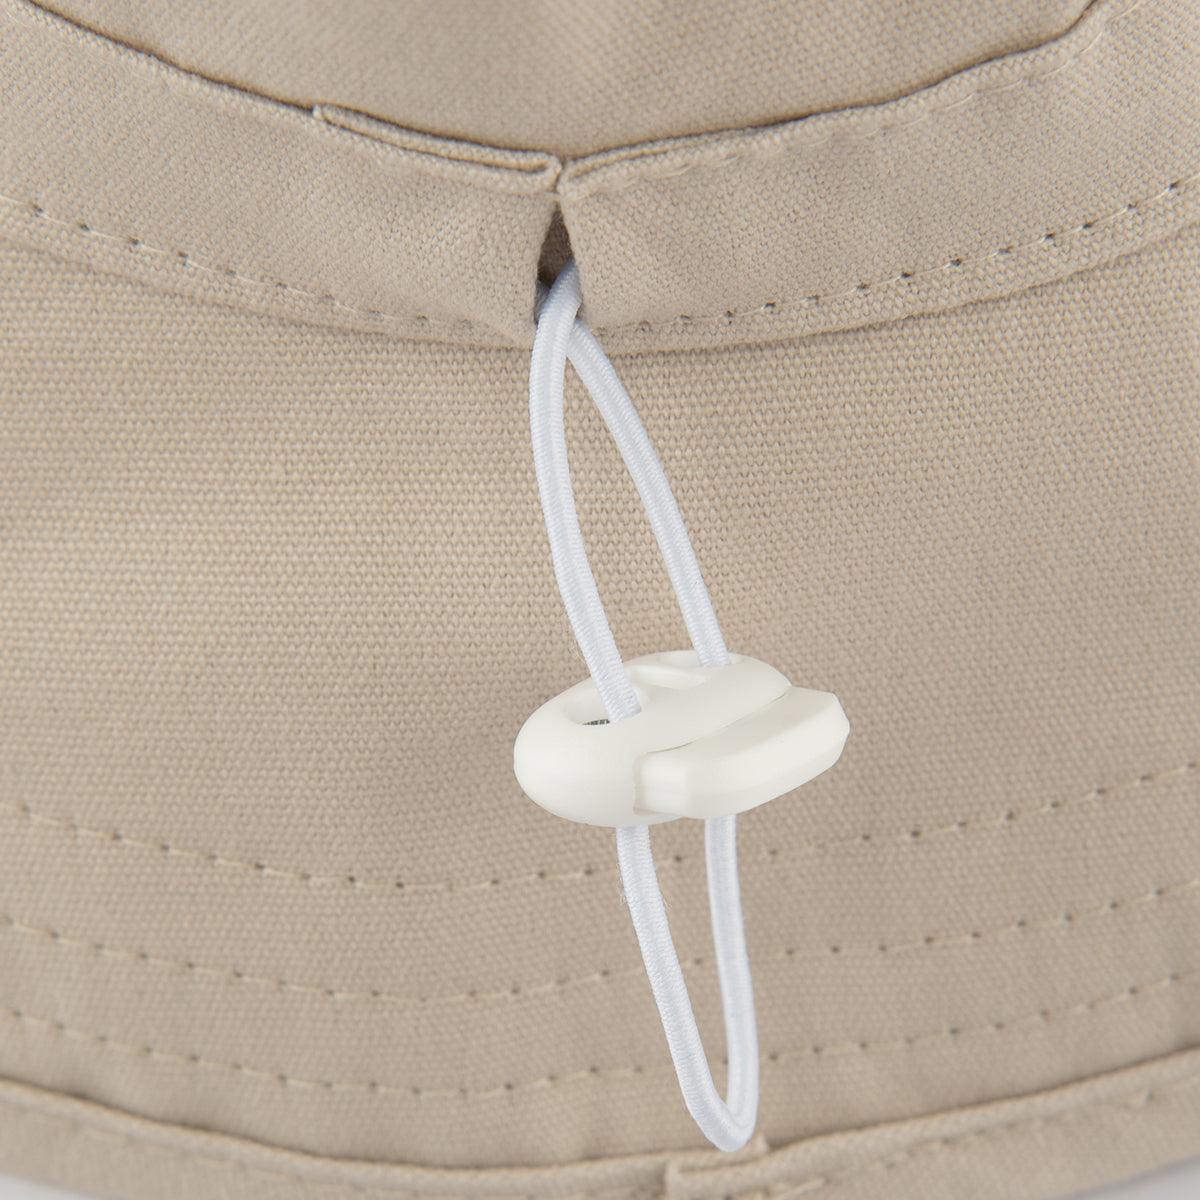 Taupe Cotton Canvas Bucket Hat: Available in Toddler & Kids Sizes - Cubs & Co.